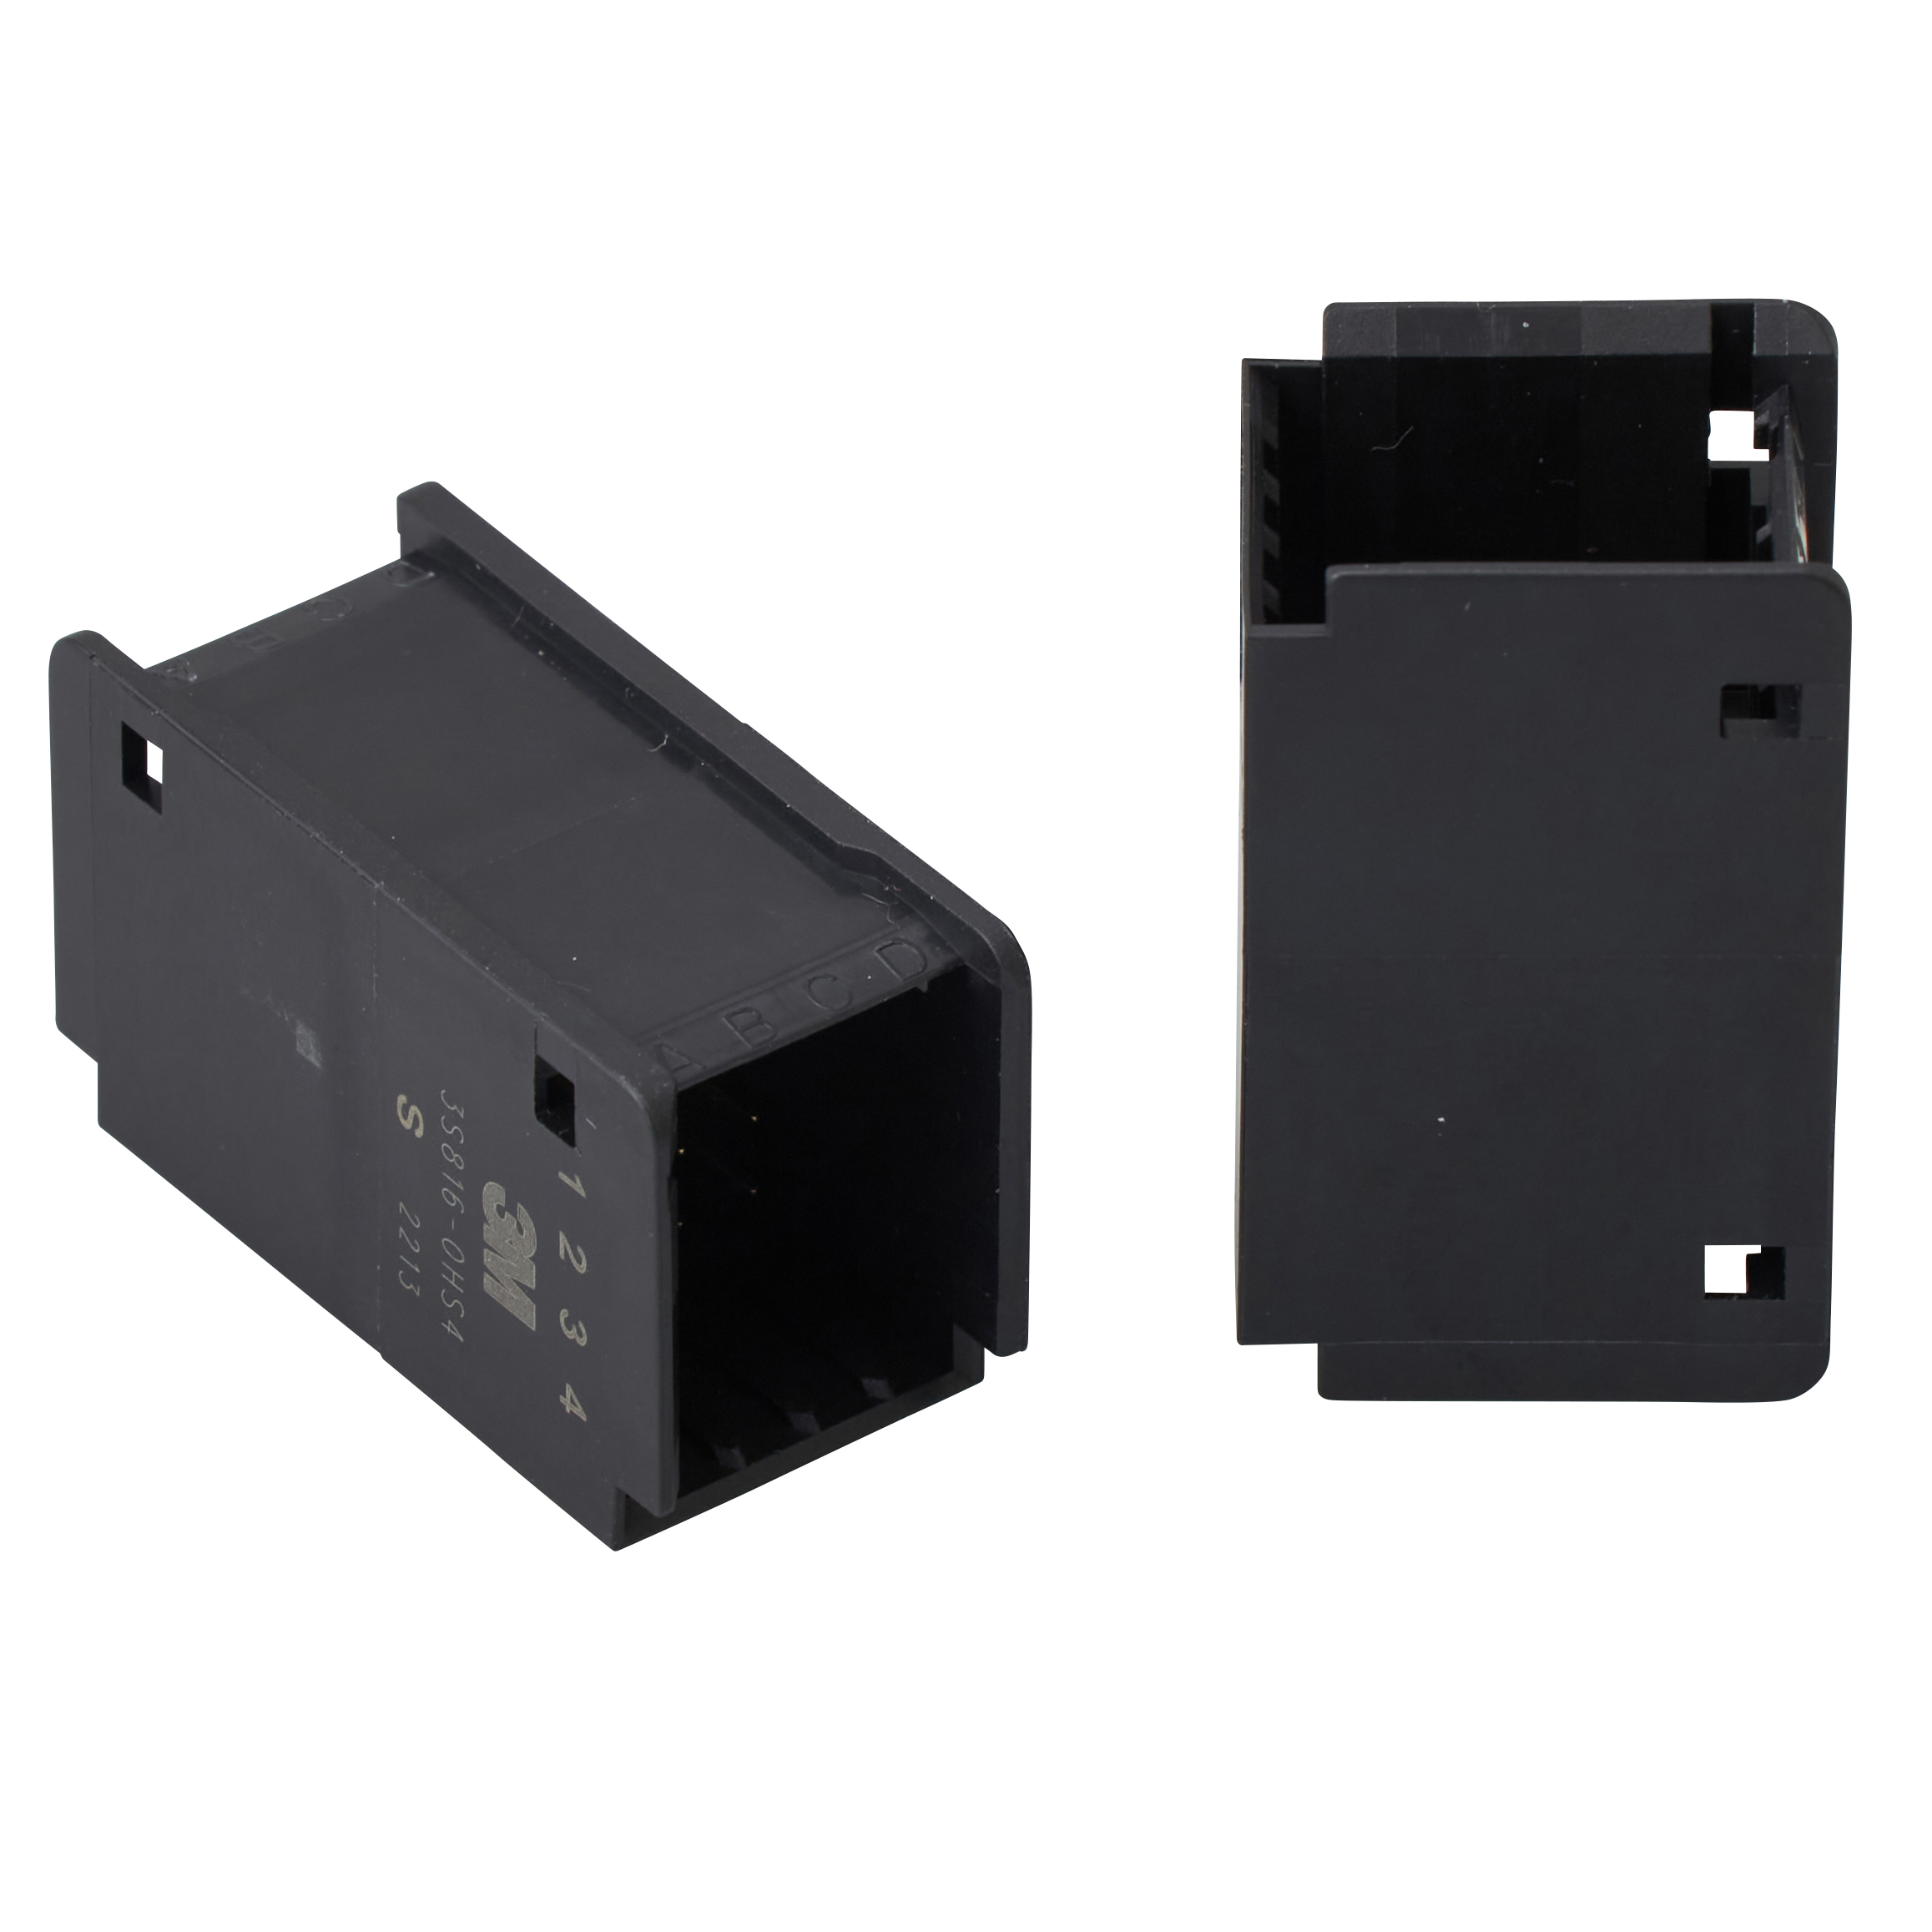 【3S816-0HS4-B00 PS】MINI STACK CONNECTOR JUNCTION HE